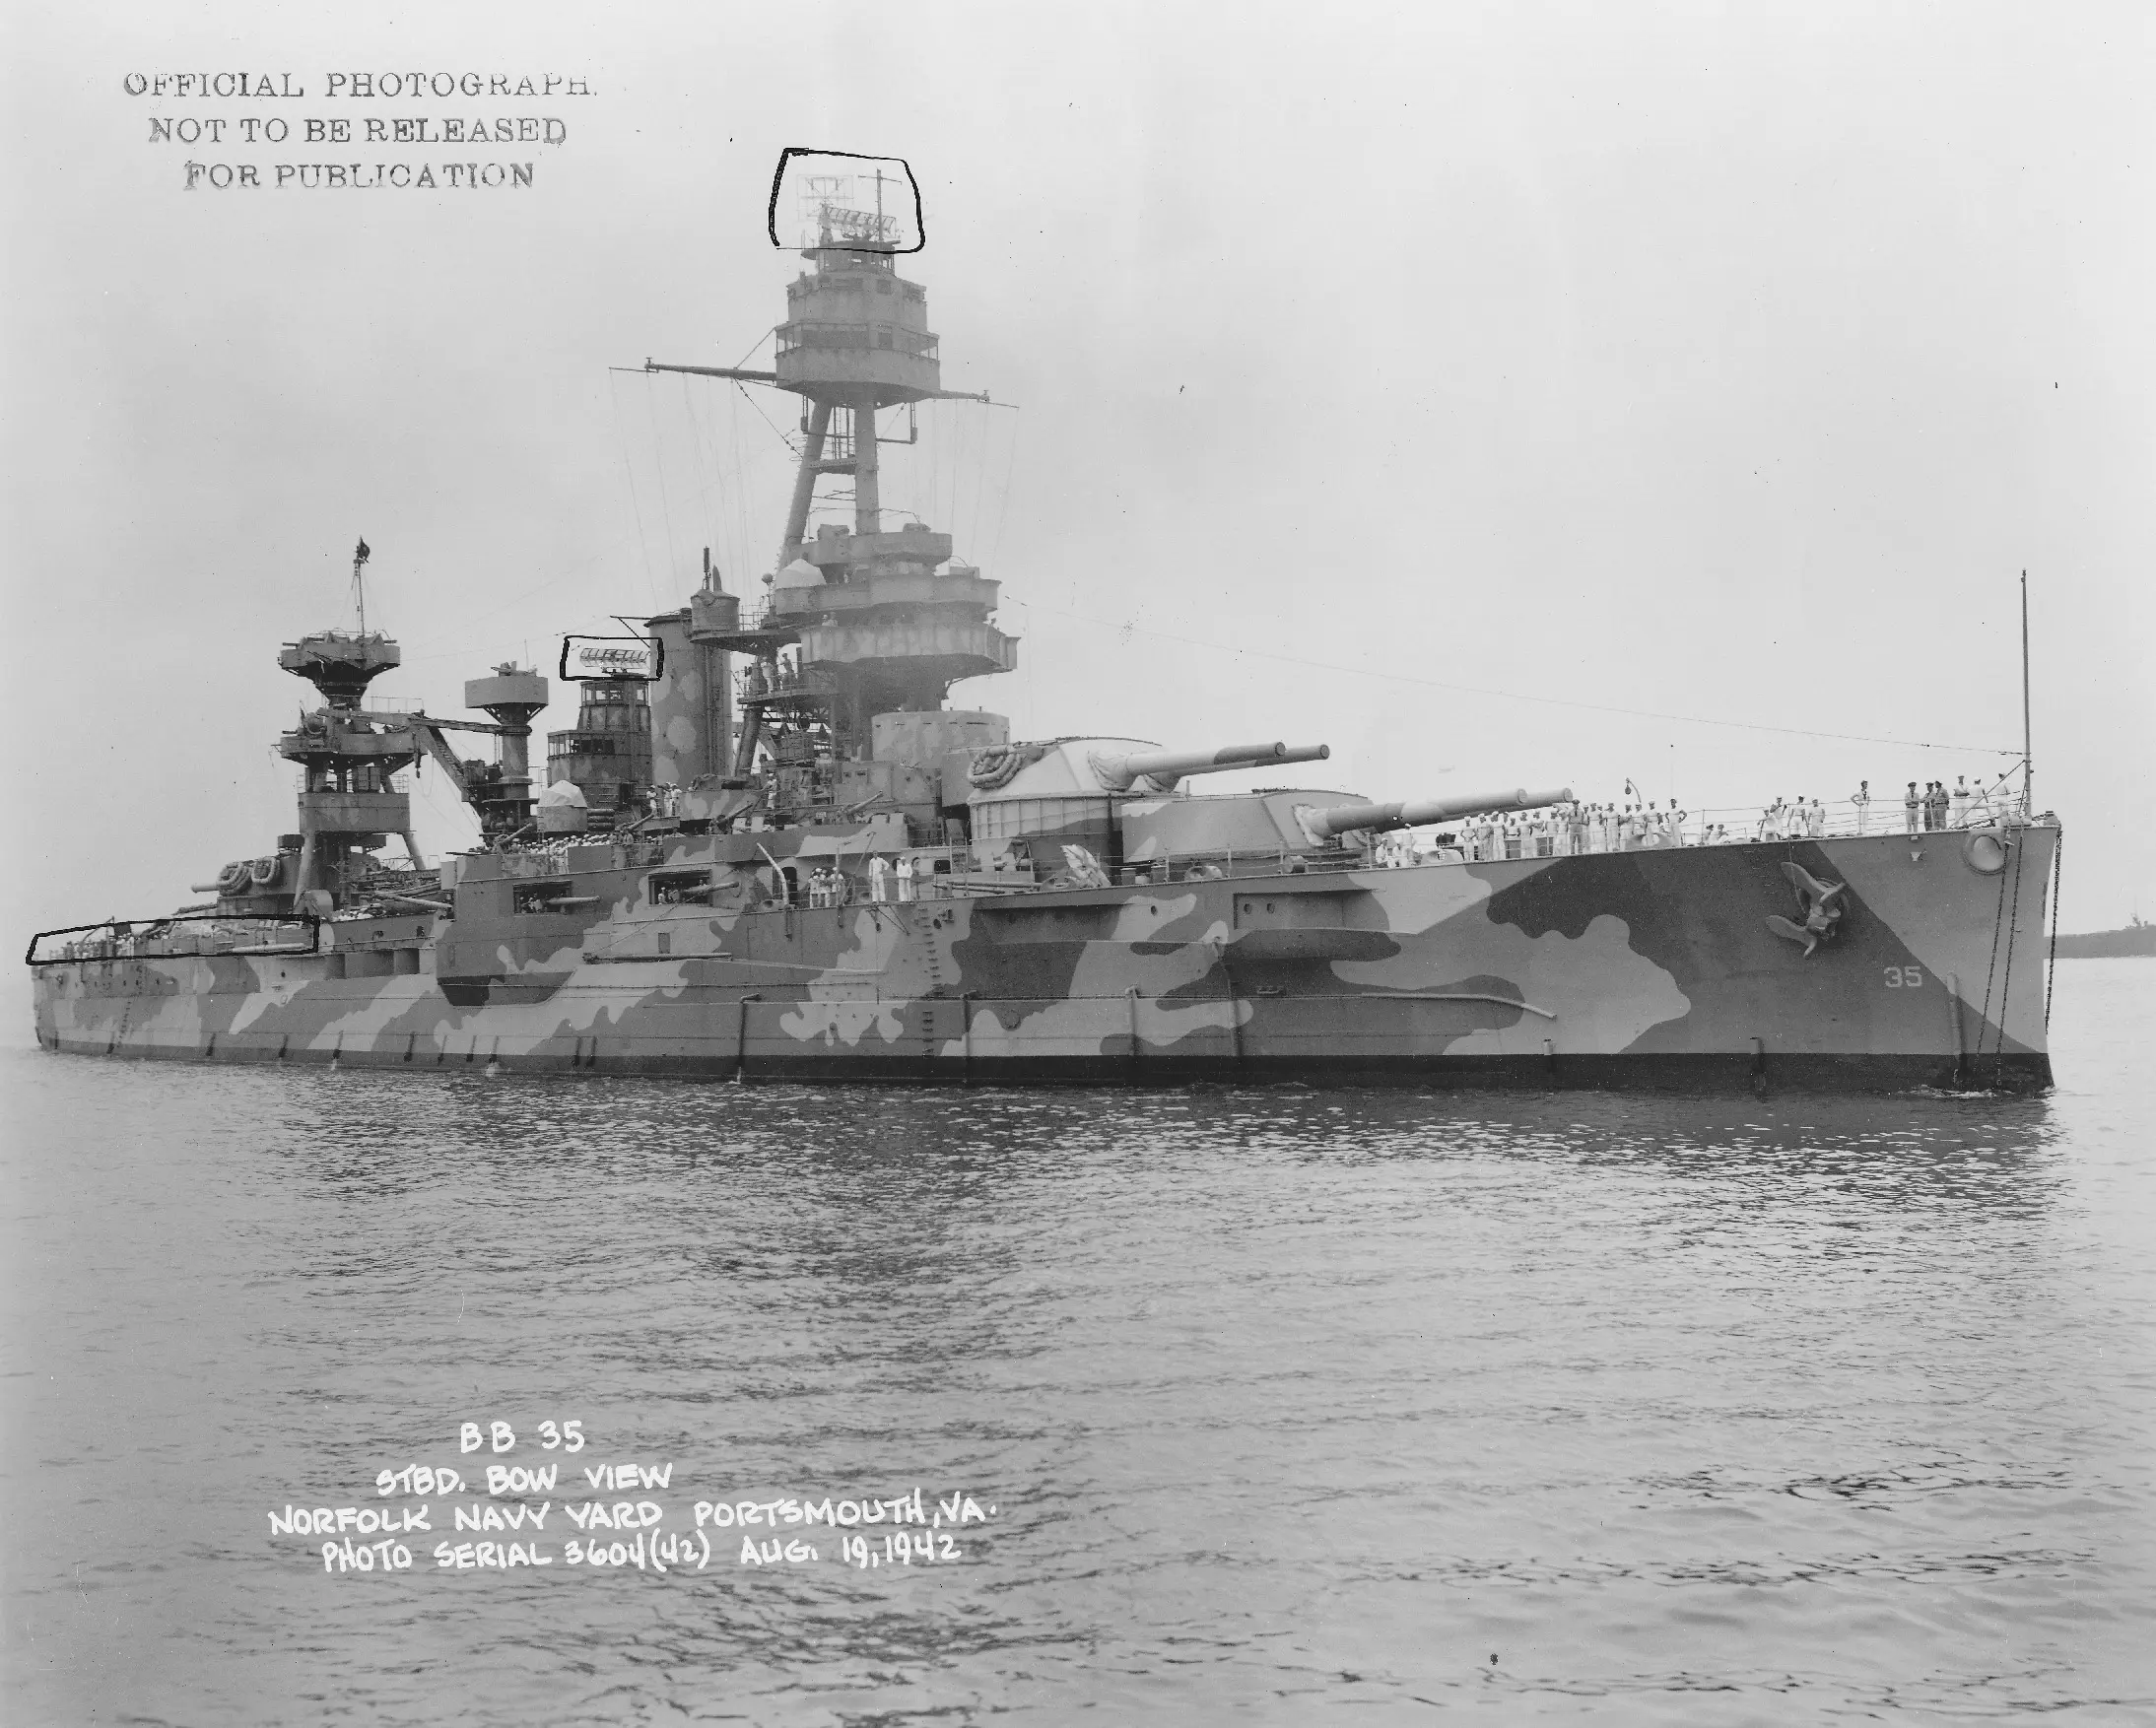 A black and white photograph showing Battleship Texas from the side. The ship is painted in a multicolor camouflage scheme, with loosely vertical splotches of light on dark. Radar antennae are marked by hand with boxes as well as the stern. A stamp in the top left corner reads OFFICIAL PHOTOGRAPH NOT TO BE RELEASED FOR PUBLICATION and a handwritten caption in the bottom left reads BB 35 STBD, BOW VIEW NORFOLK NAVY YARD PORTSMOUTH, VA. PHOTO SERIAL 3604(42) AUG, 19, 1942